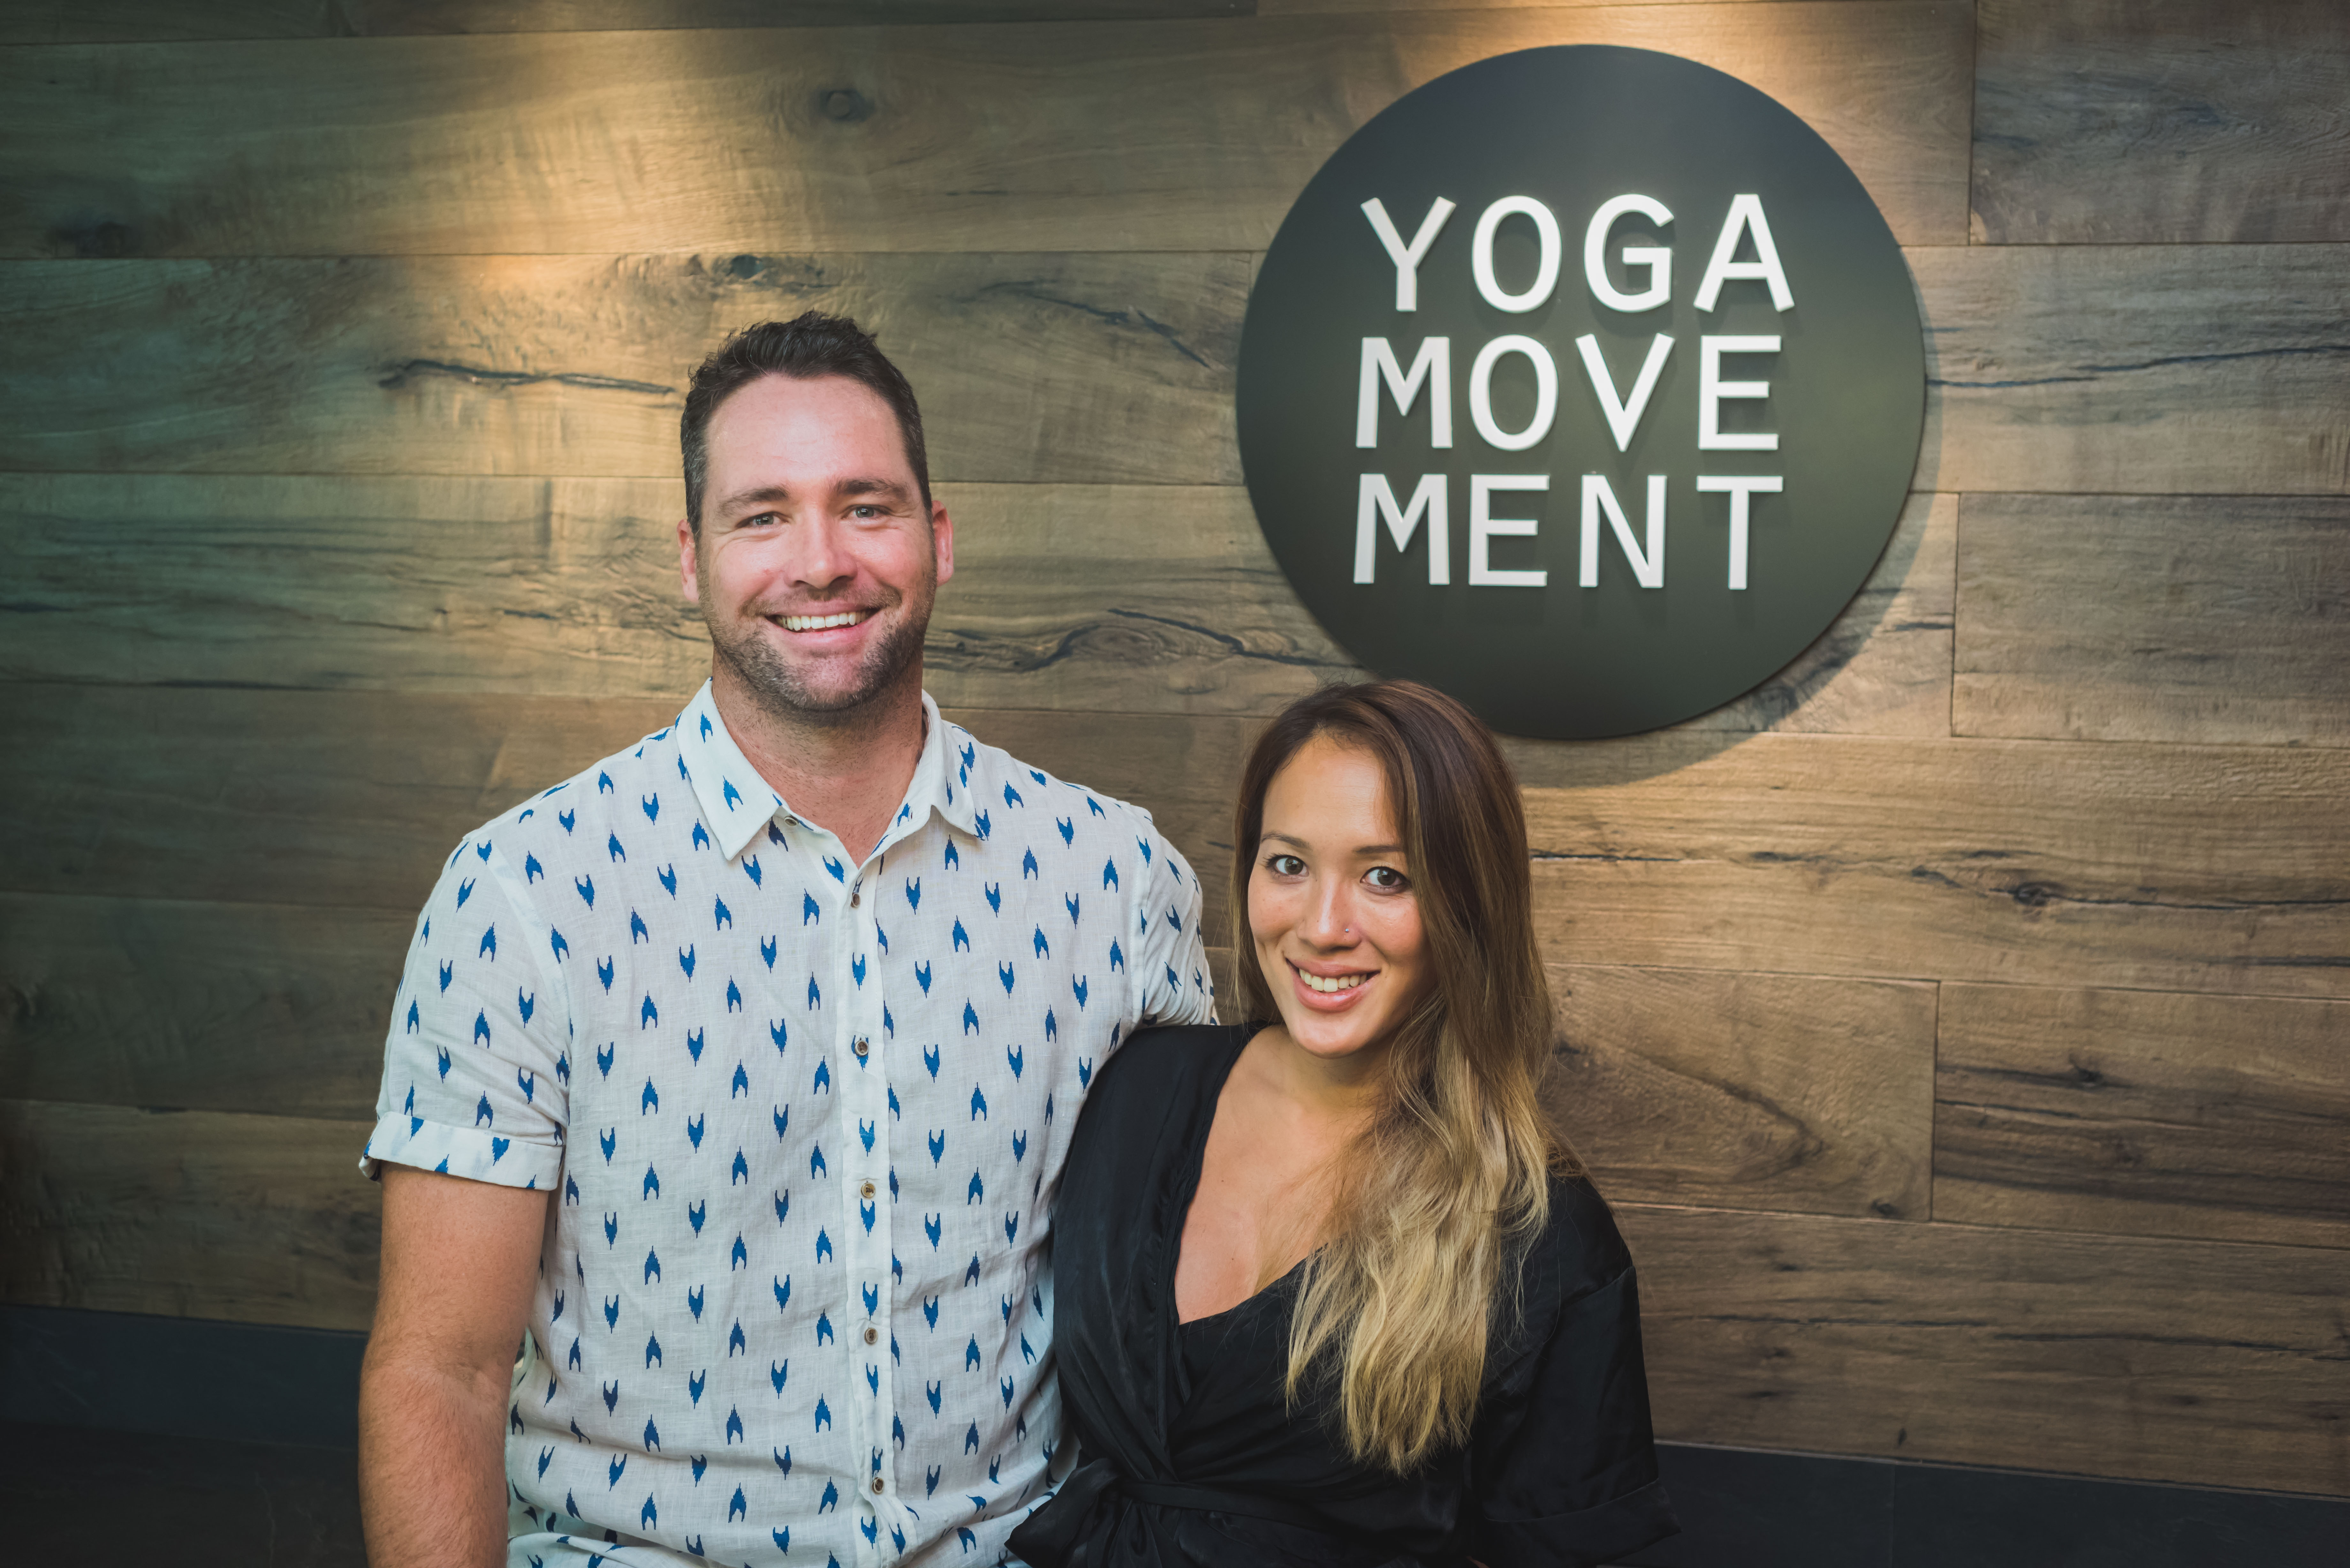 Together On Top: Alicia Pan & Peter Thew, Yoga Movement, Singapore